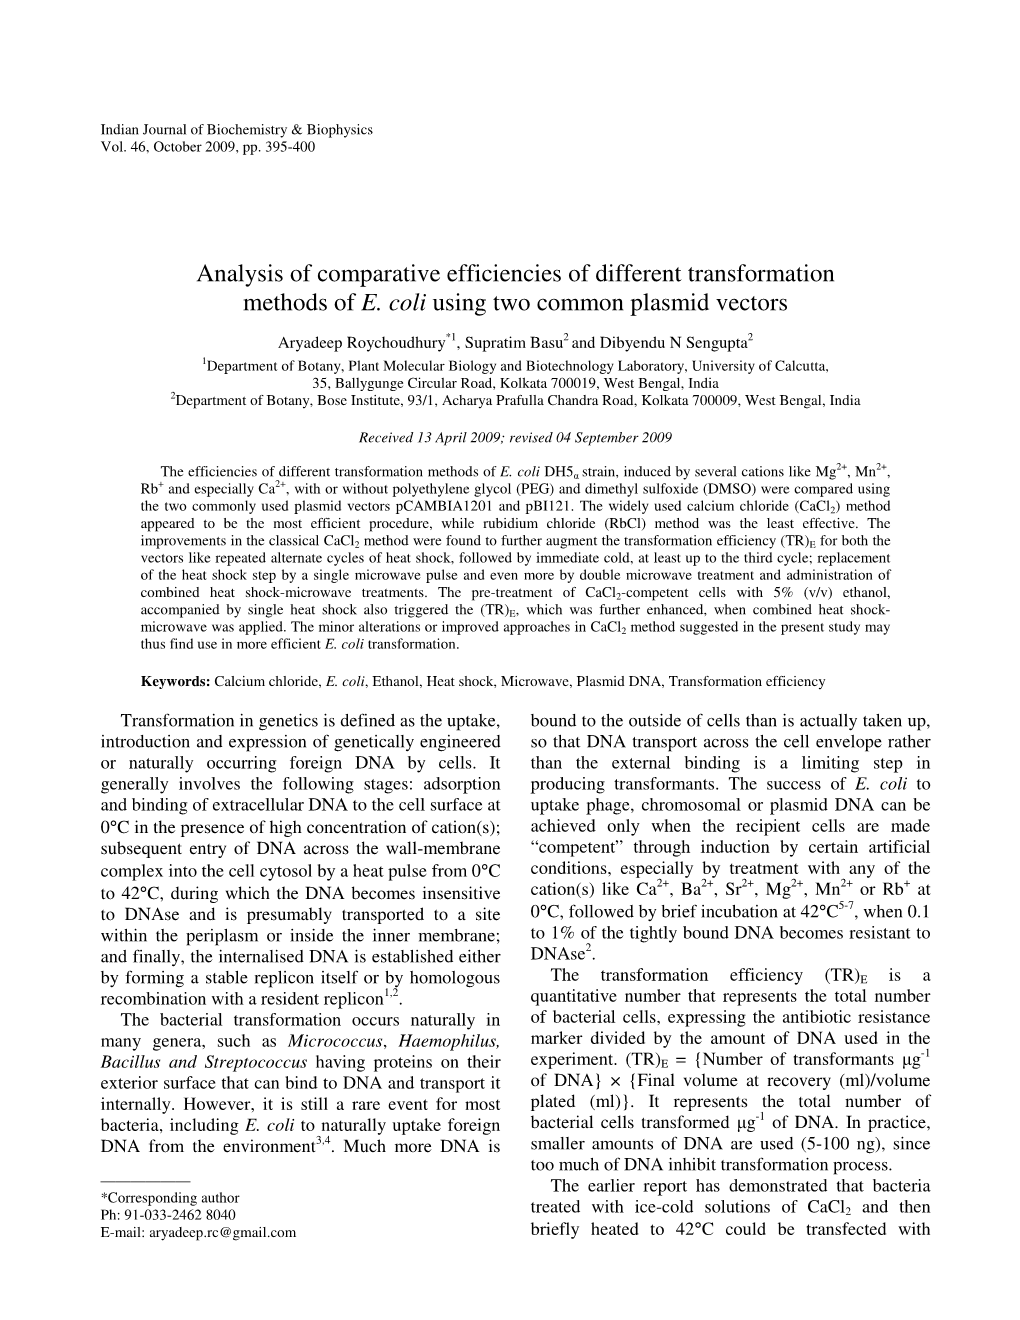 Analysis of Comparative Efficiencies of Different Transformation Methods of E